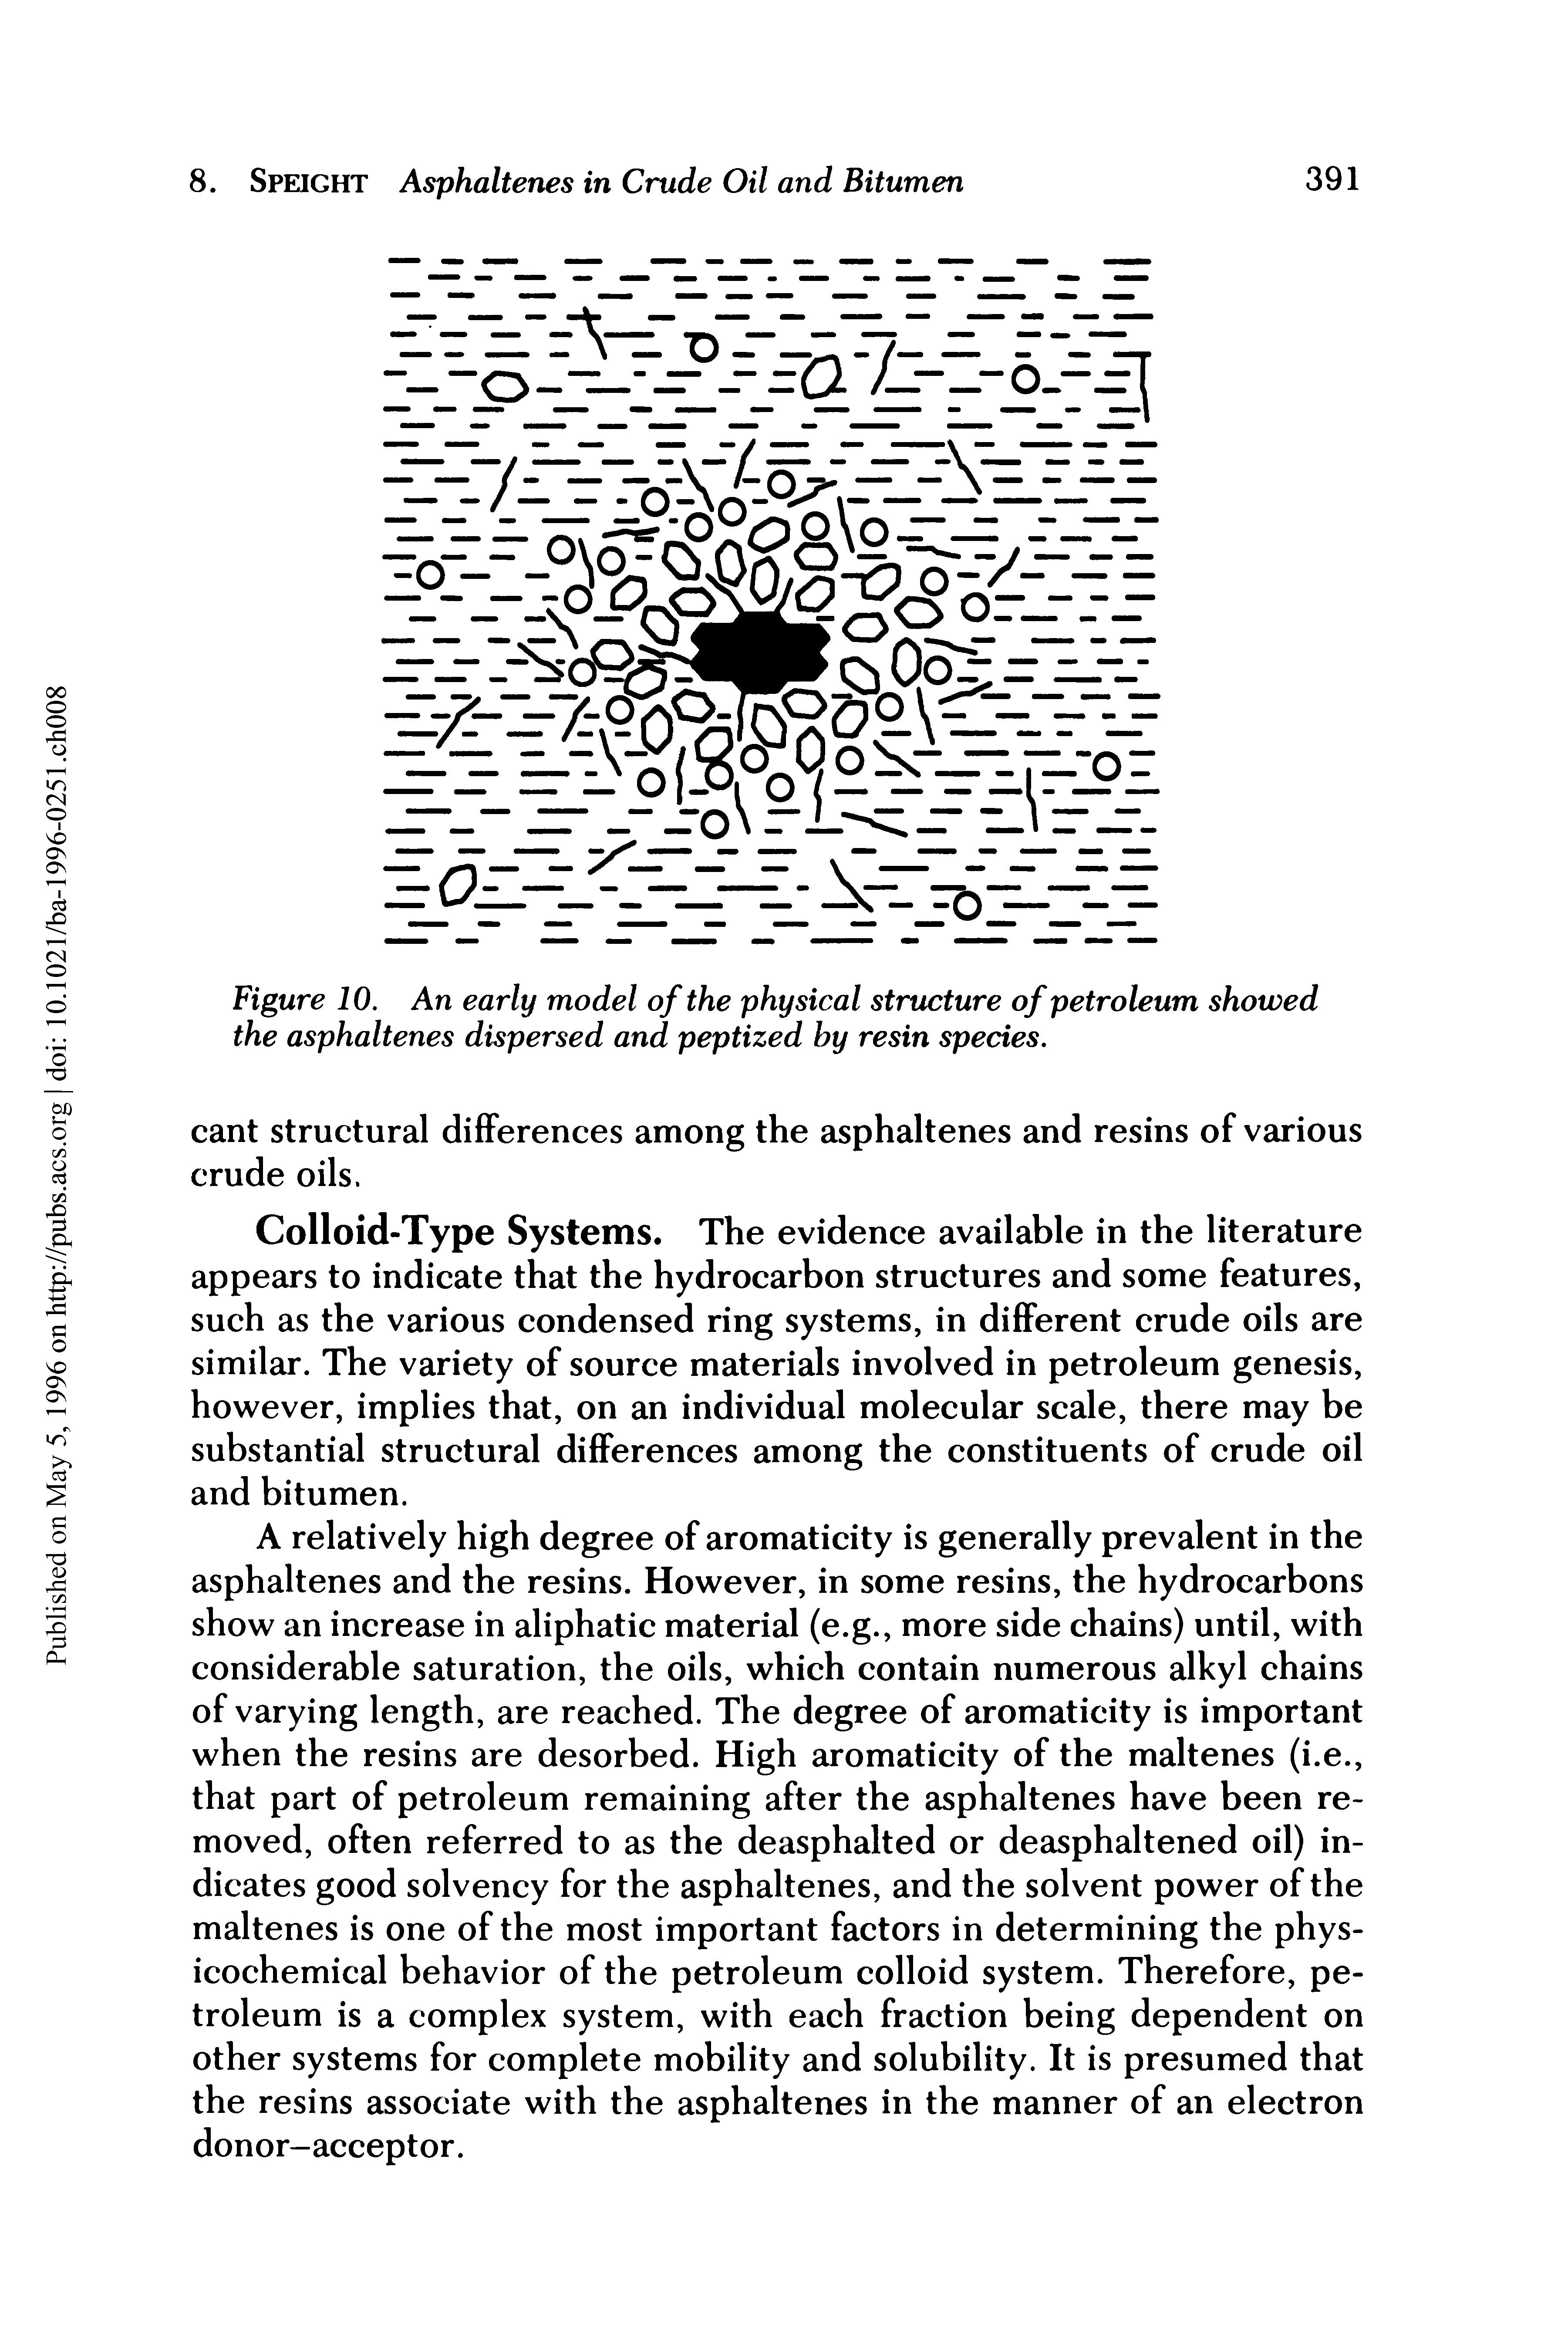 Figure 10. An early model of the physical structure of petroleum showed the asphaltenes dispersed and peptized by resin species.